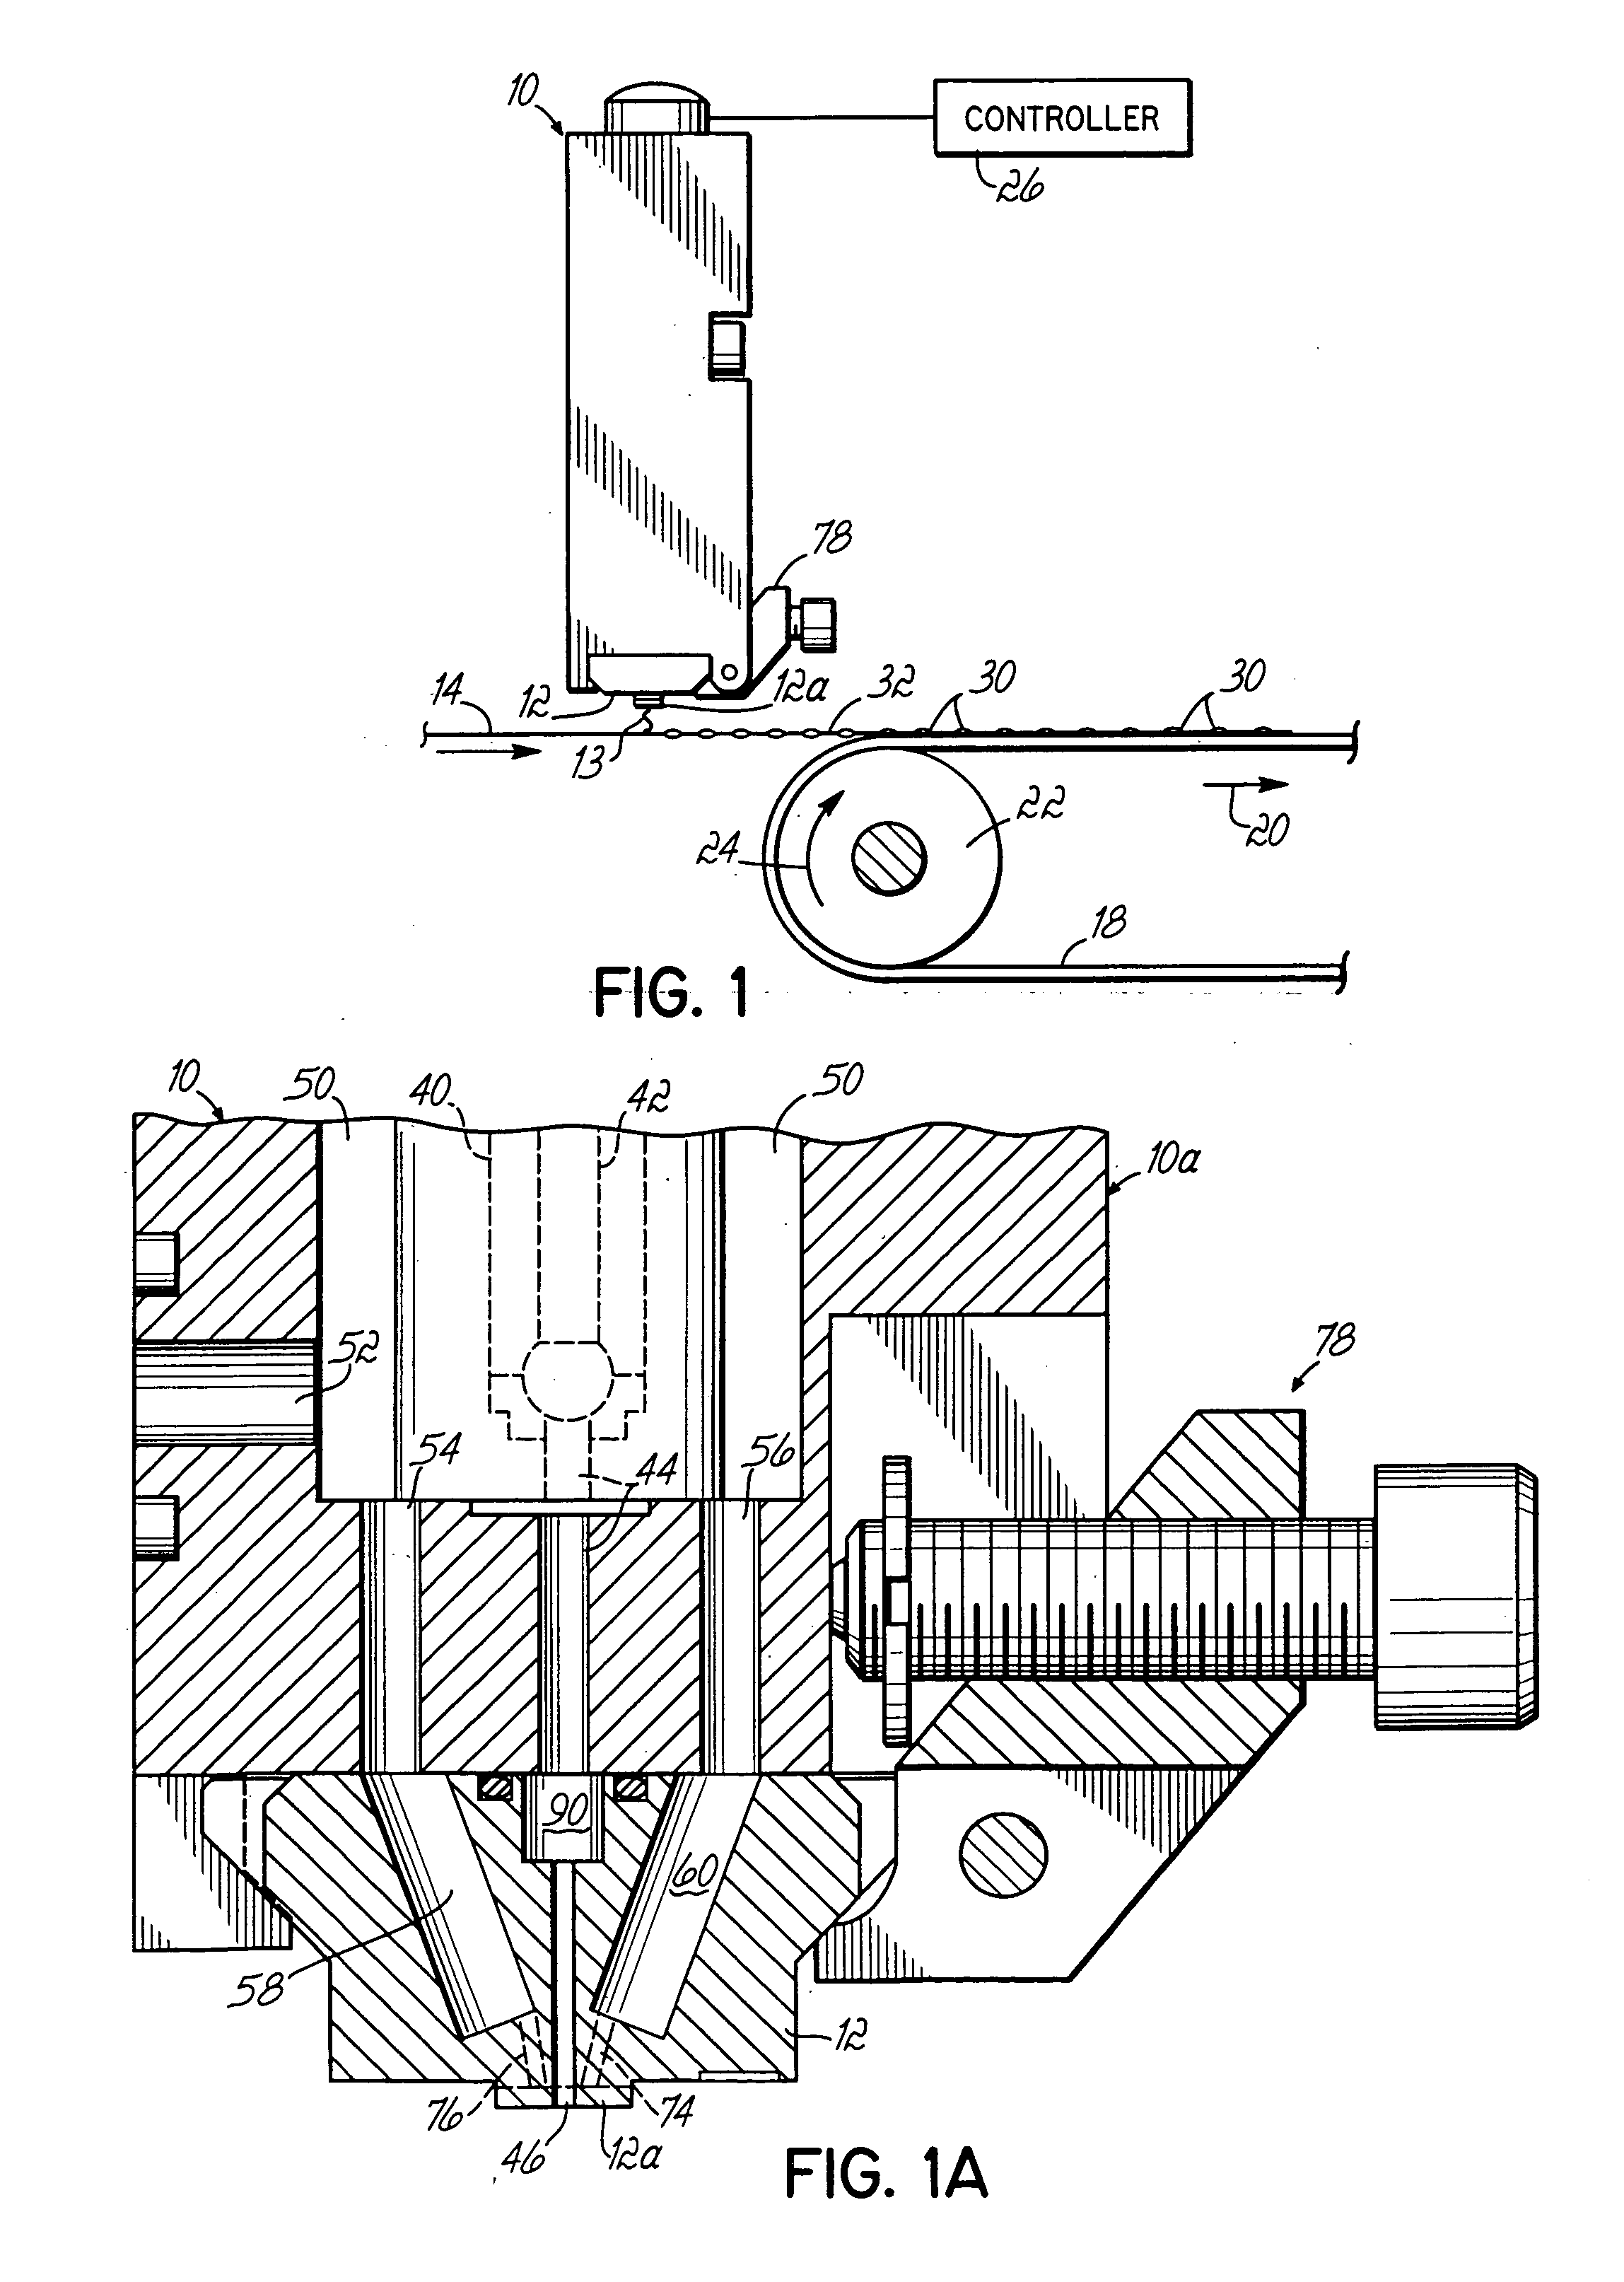 Method of applying a continuous adhesive filament to an elastic strand with discrete bond points and articles manufactured by the method